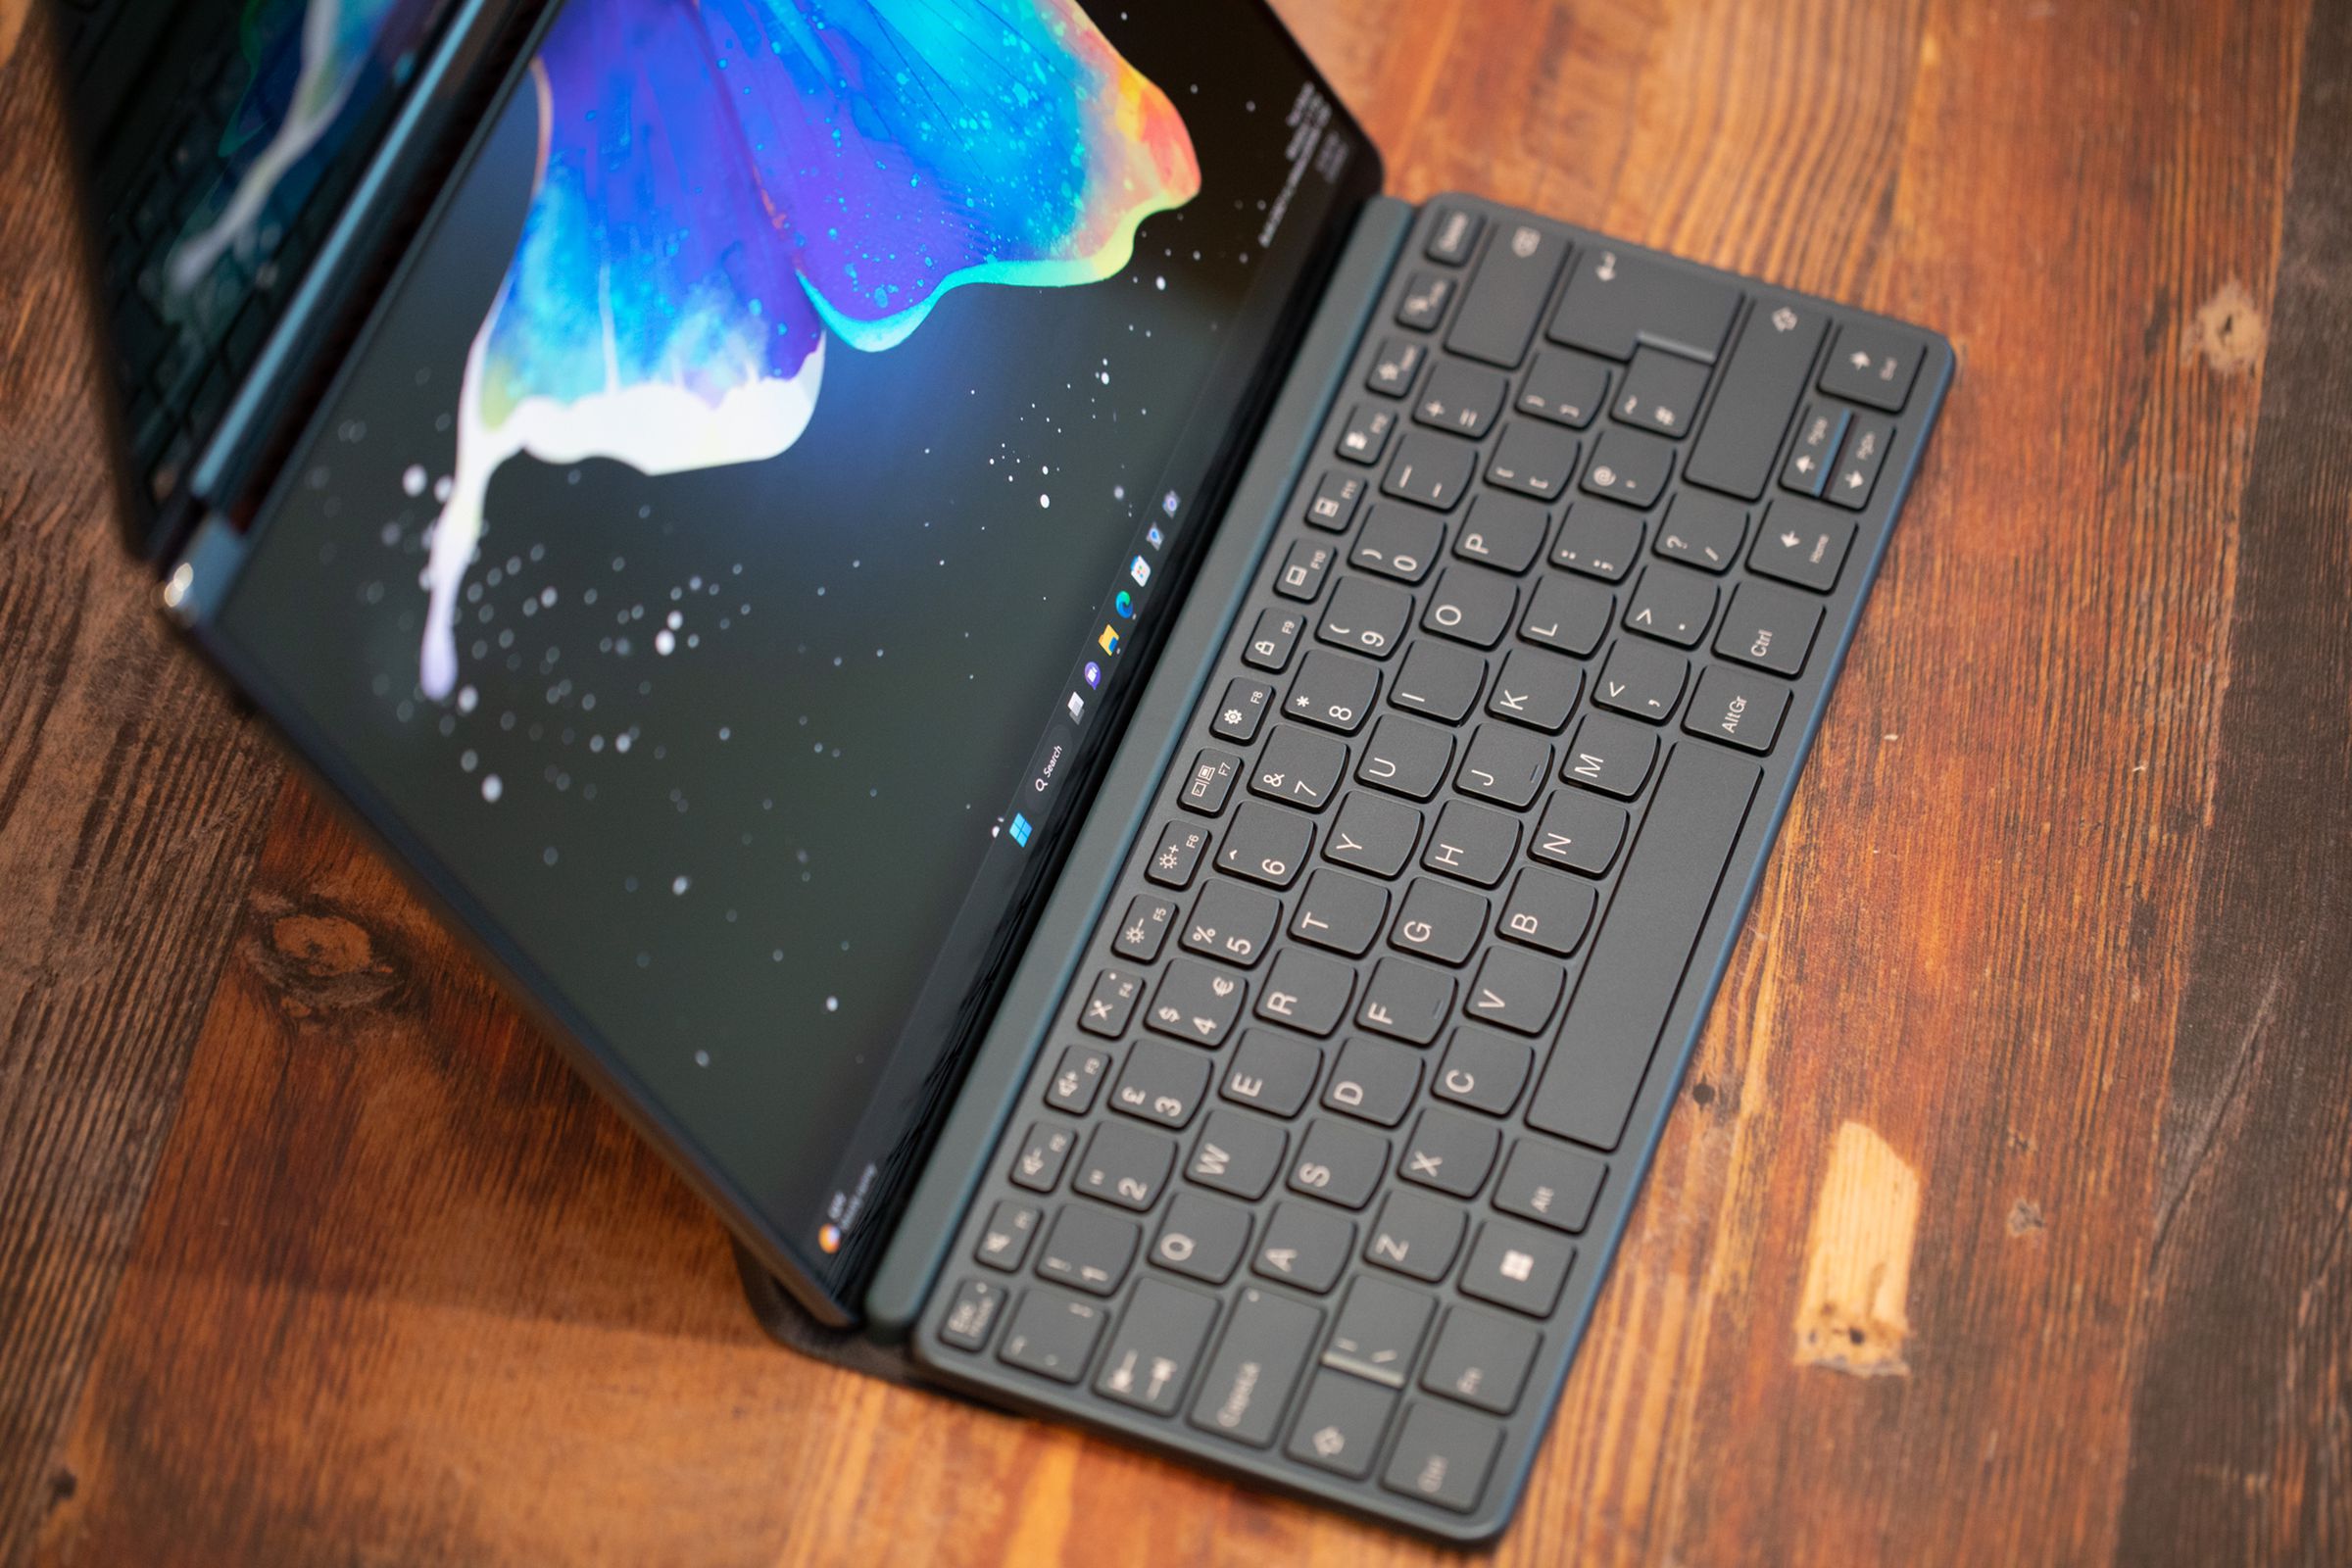 Keyboard connected to Lenovo Yoga Book 9i in portrait mode.